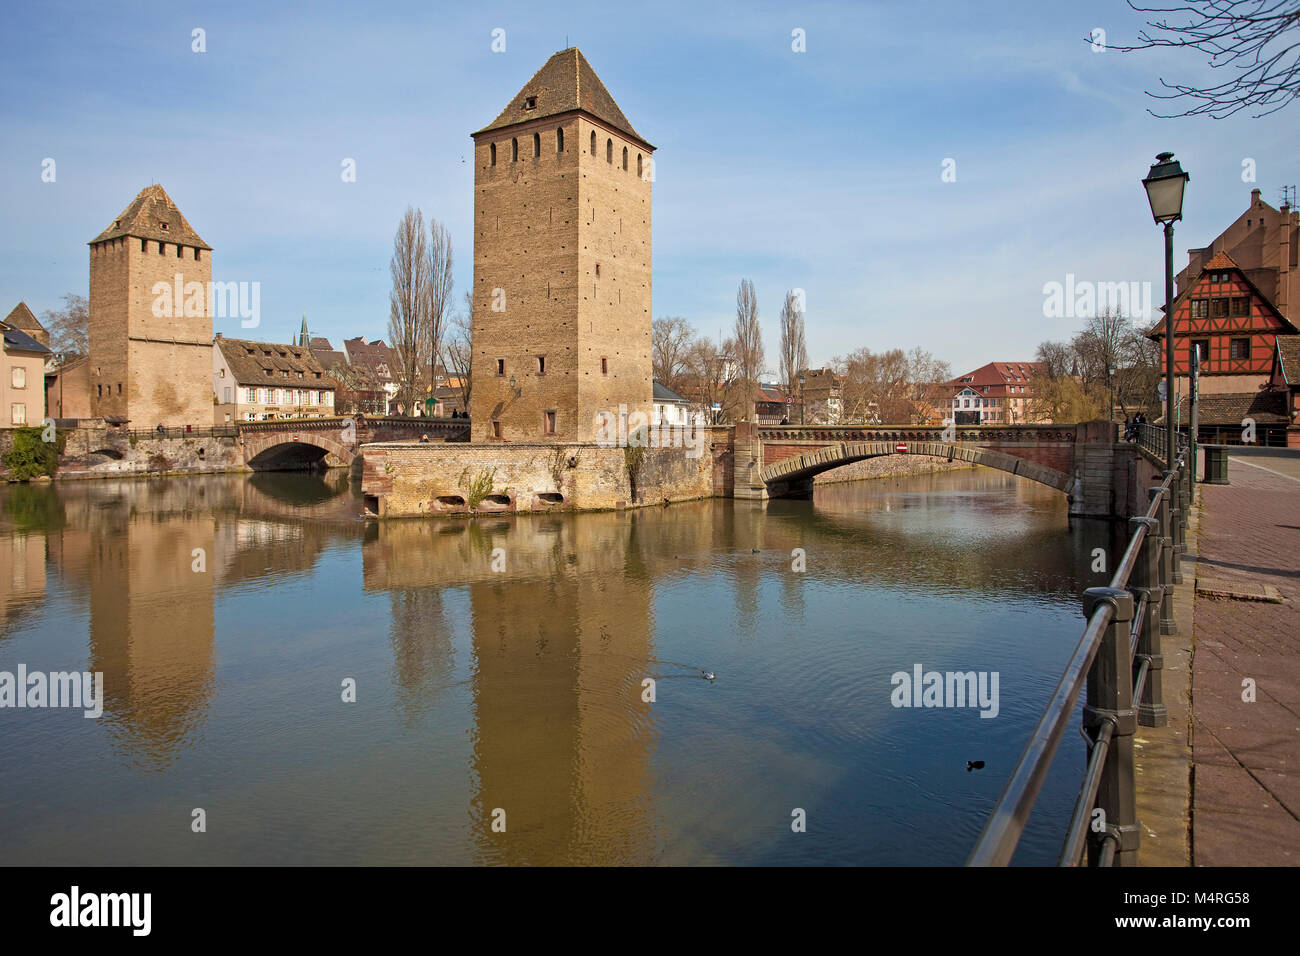 Ponts couvert, medieval bridge and towers at La Petite France (Little France), Strasbourg, Alsace, Bas-Rhin, France, Europe Stock Photo